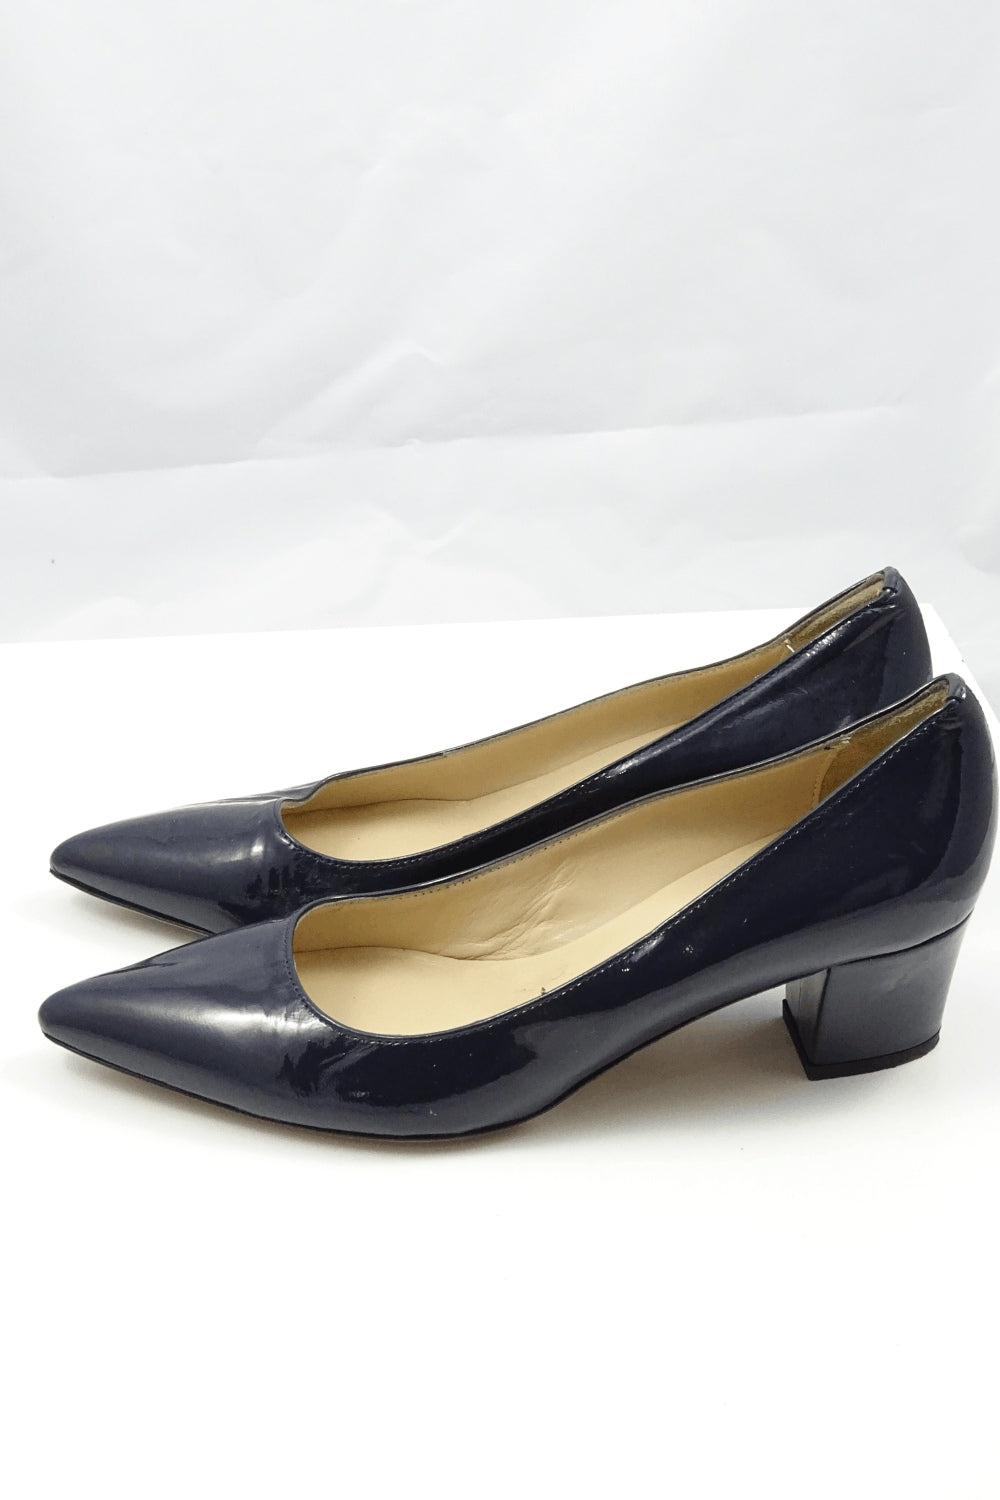 Patent Navy Dominique pumps. Pointed toe and elegant design. Made in Italy.